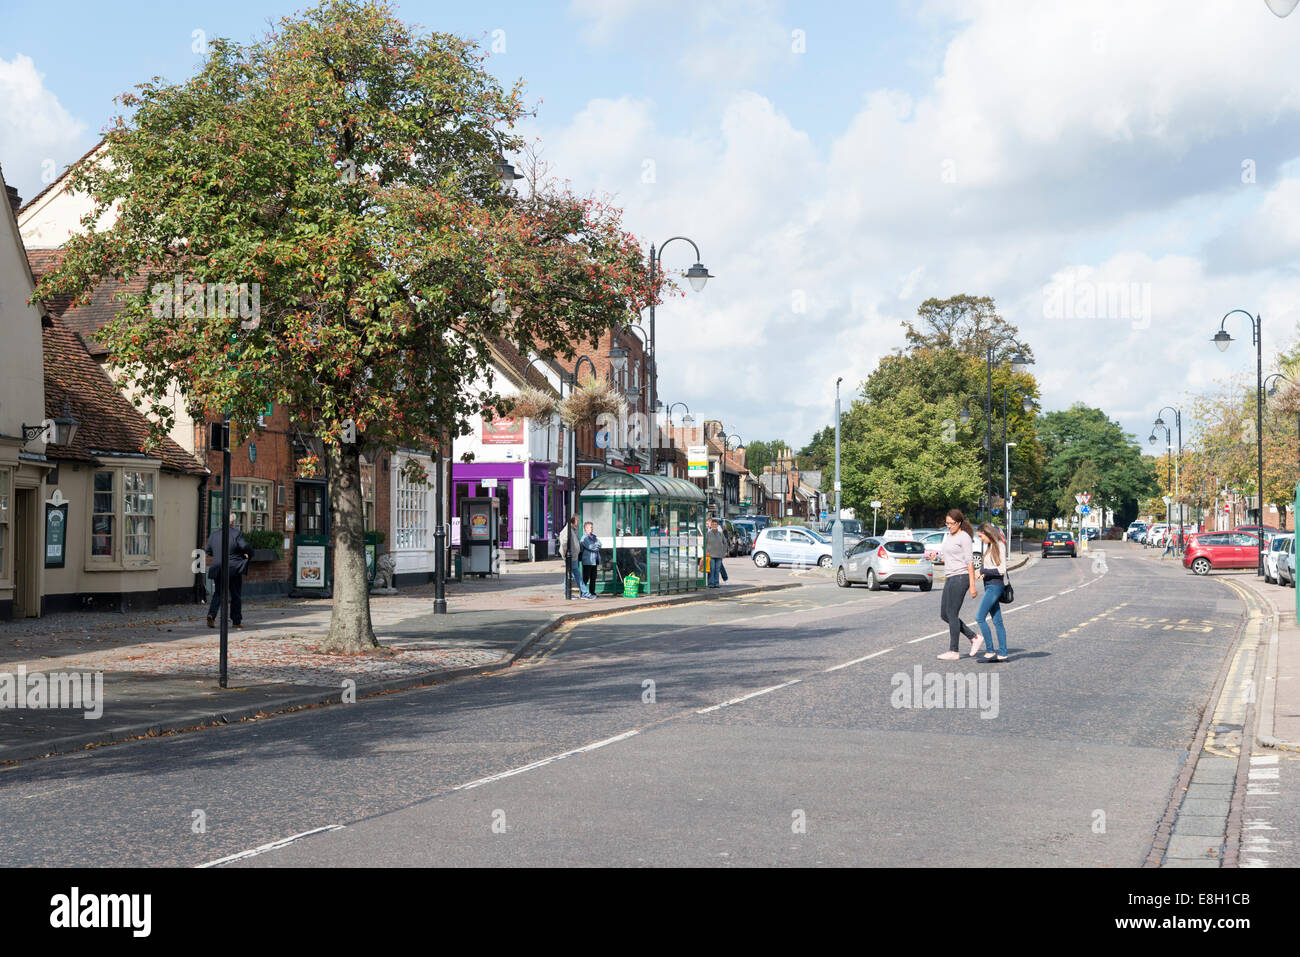 Shops and the High street in Stevenage Old Town Hertfordshire UK Stock Photo